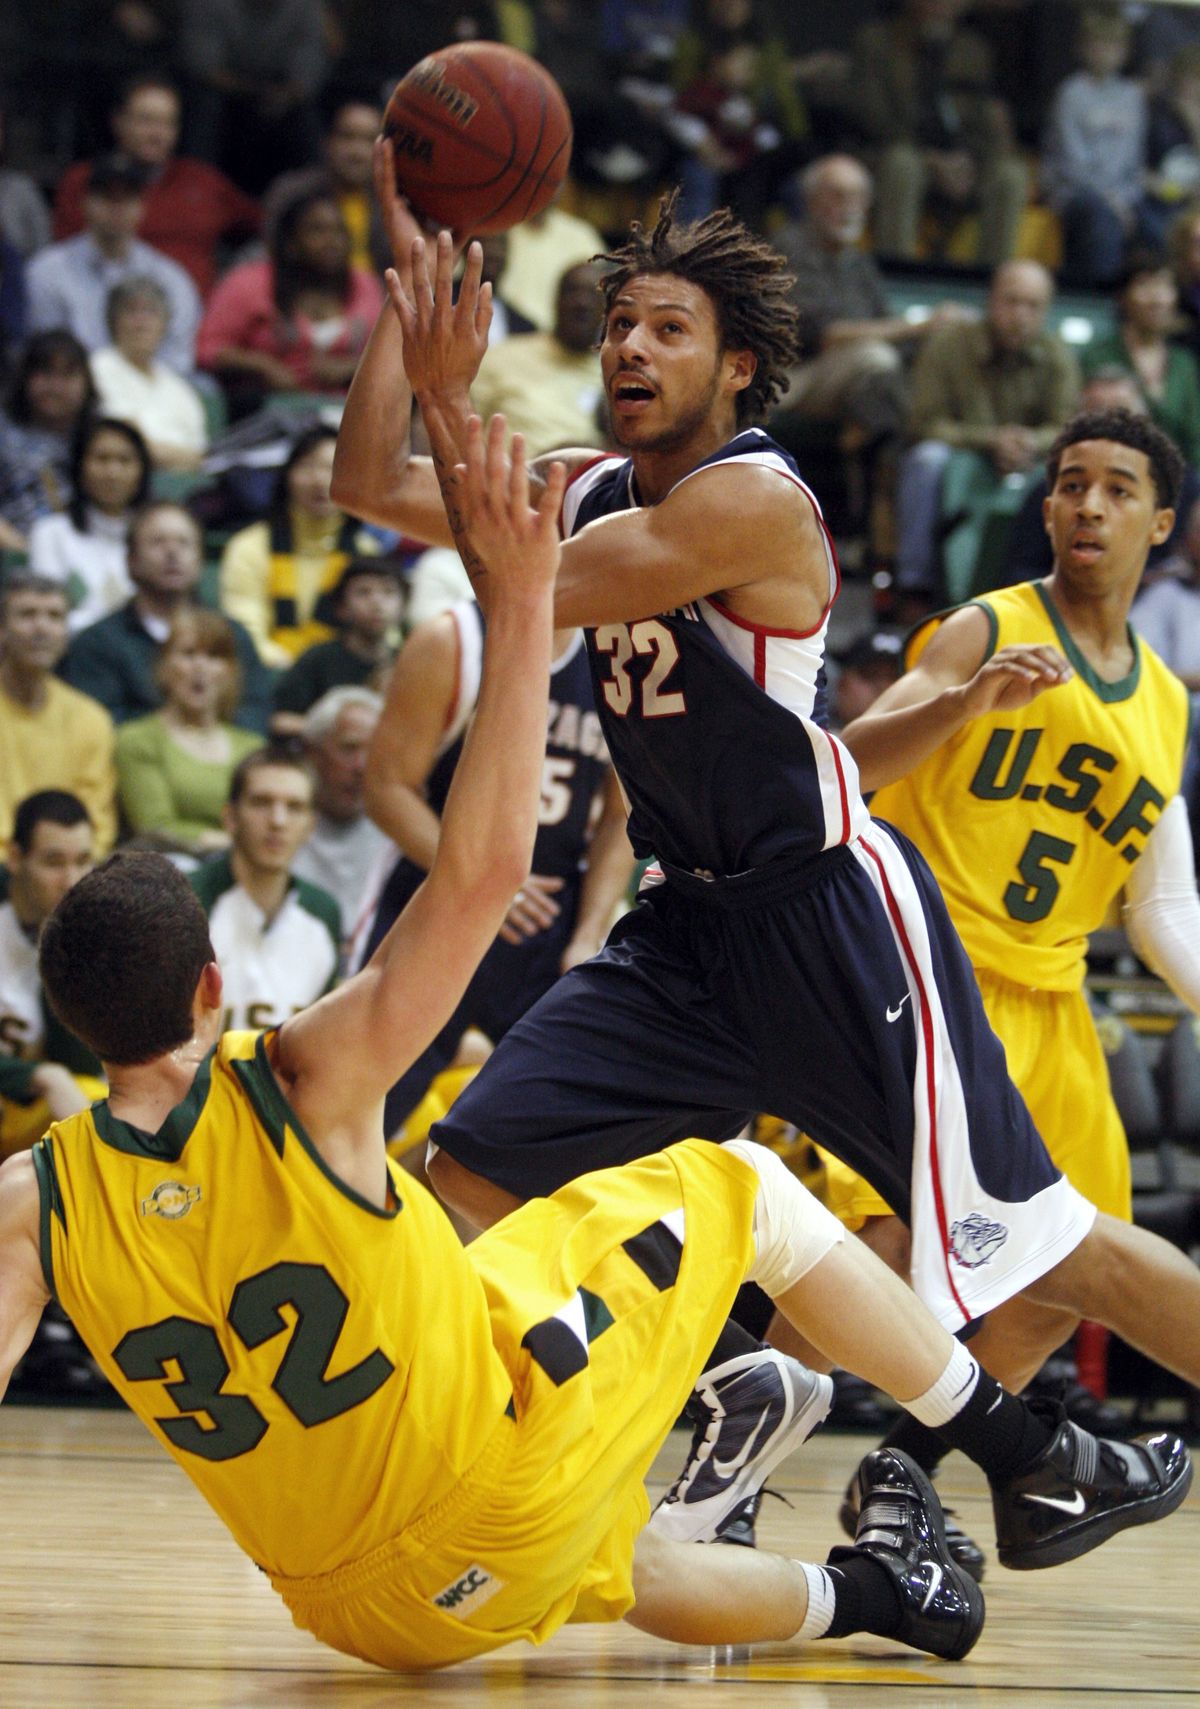 USF and Angelo Caloiaro wouldn’t go down easily as Gonzaga’s Steven Gray discovered.  (Associated Press)